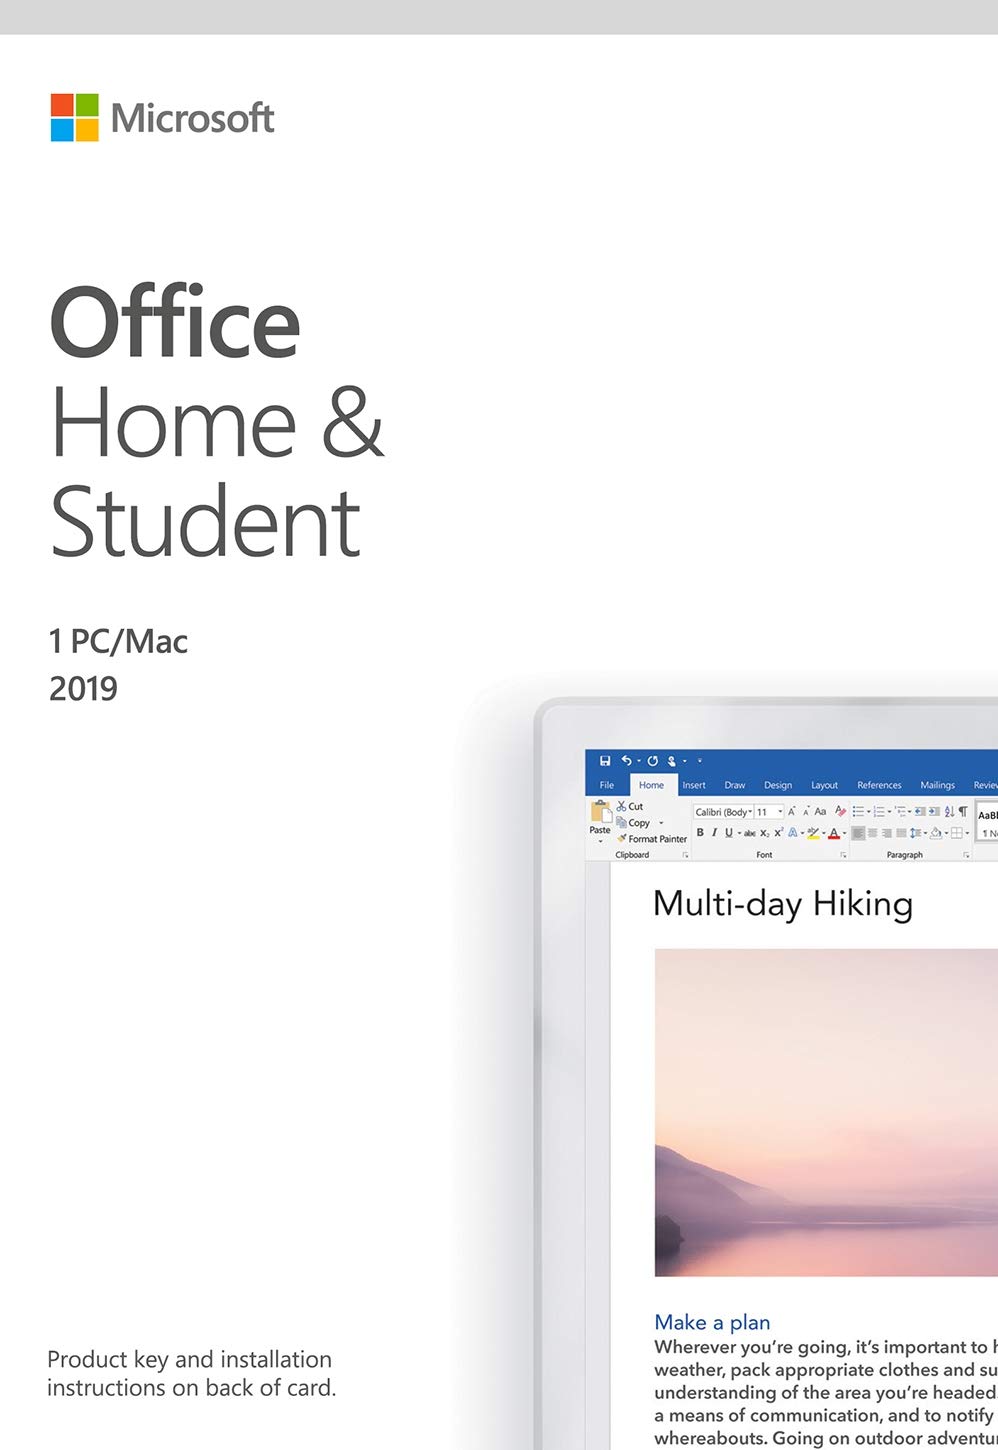 discounted ms office for students